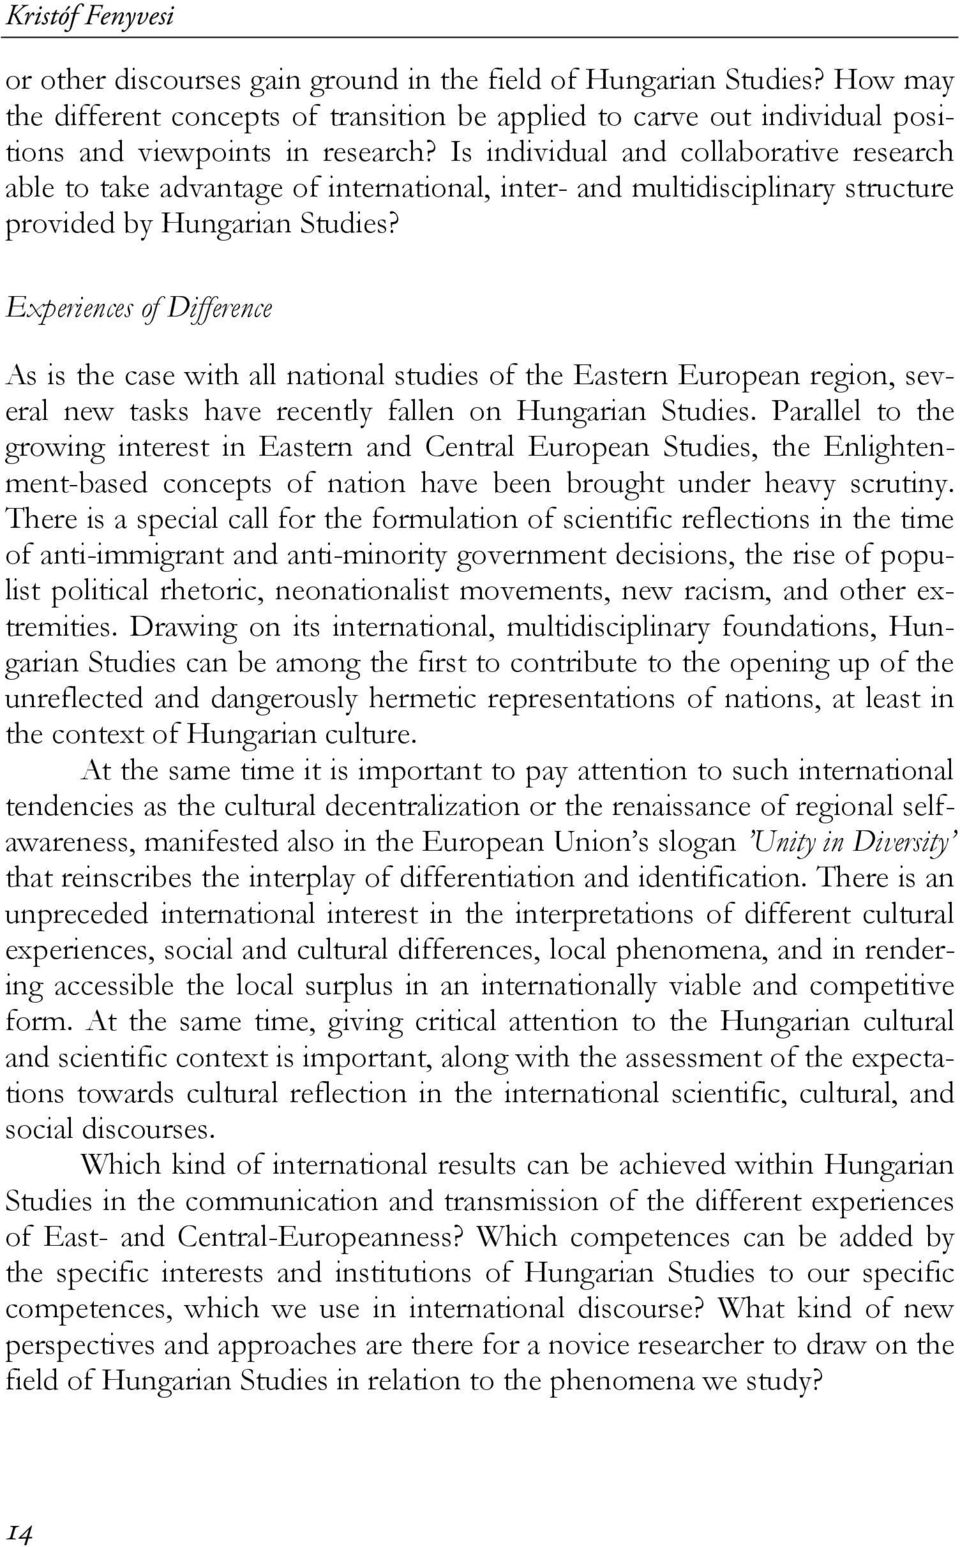 Is individual and collaborative research able to take advantage of international, inter- and multidisciplinary structure provided by Hungarian Studies?